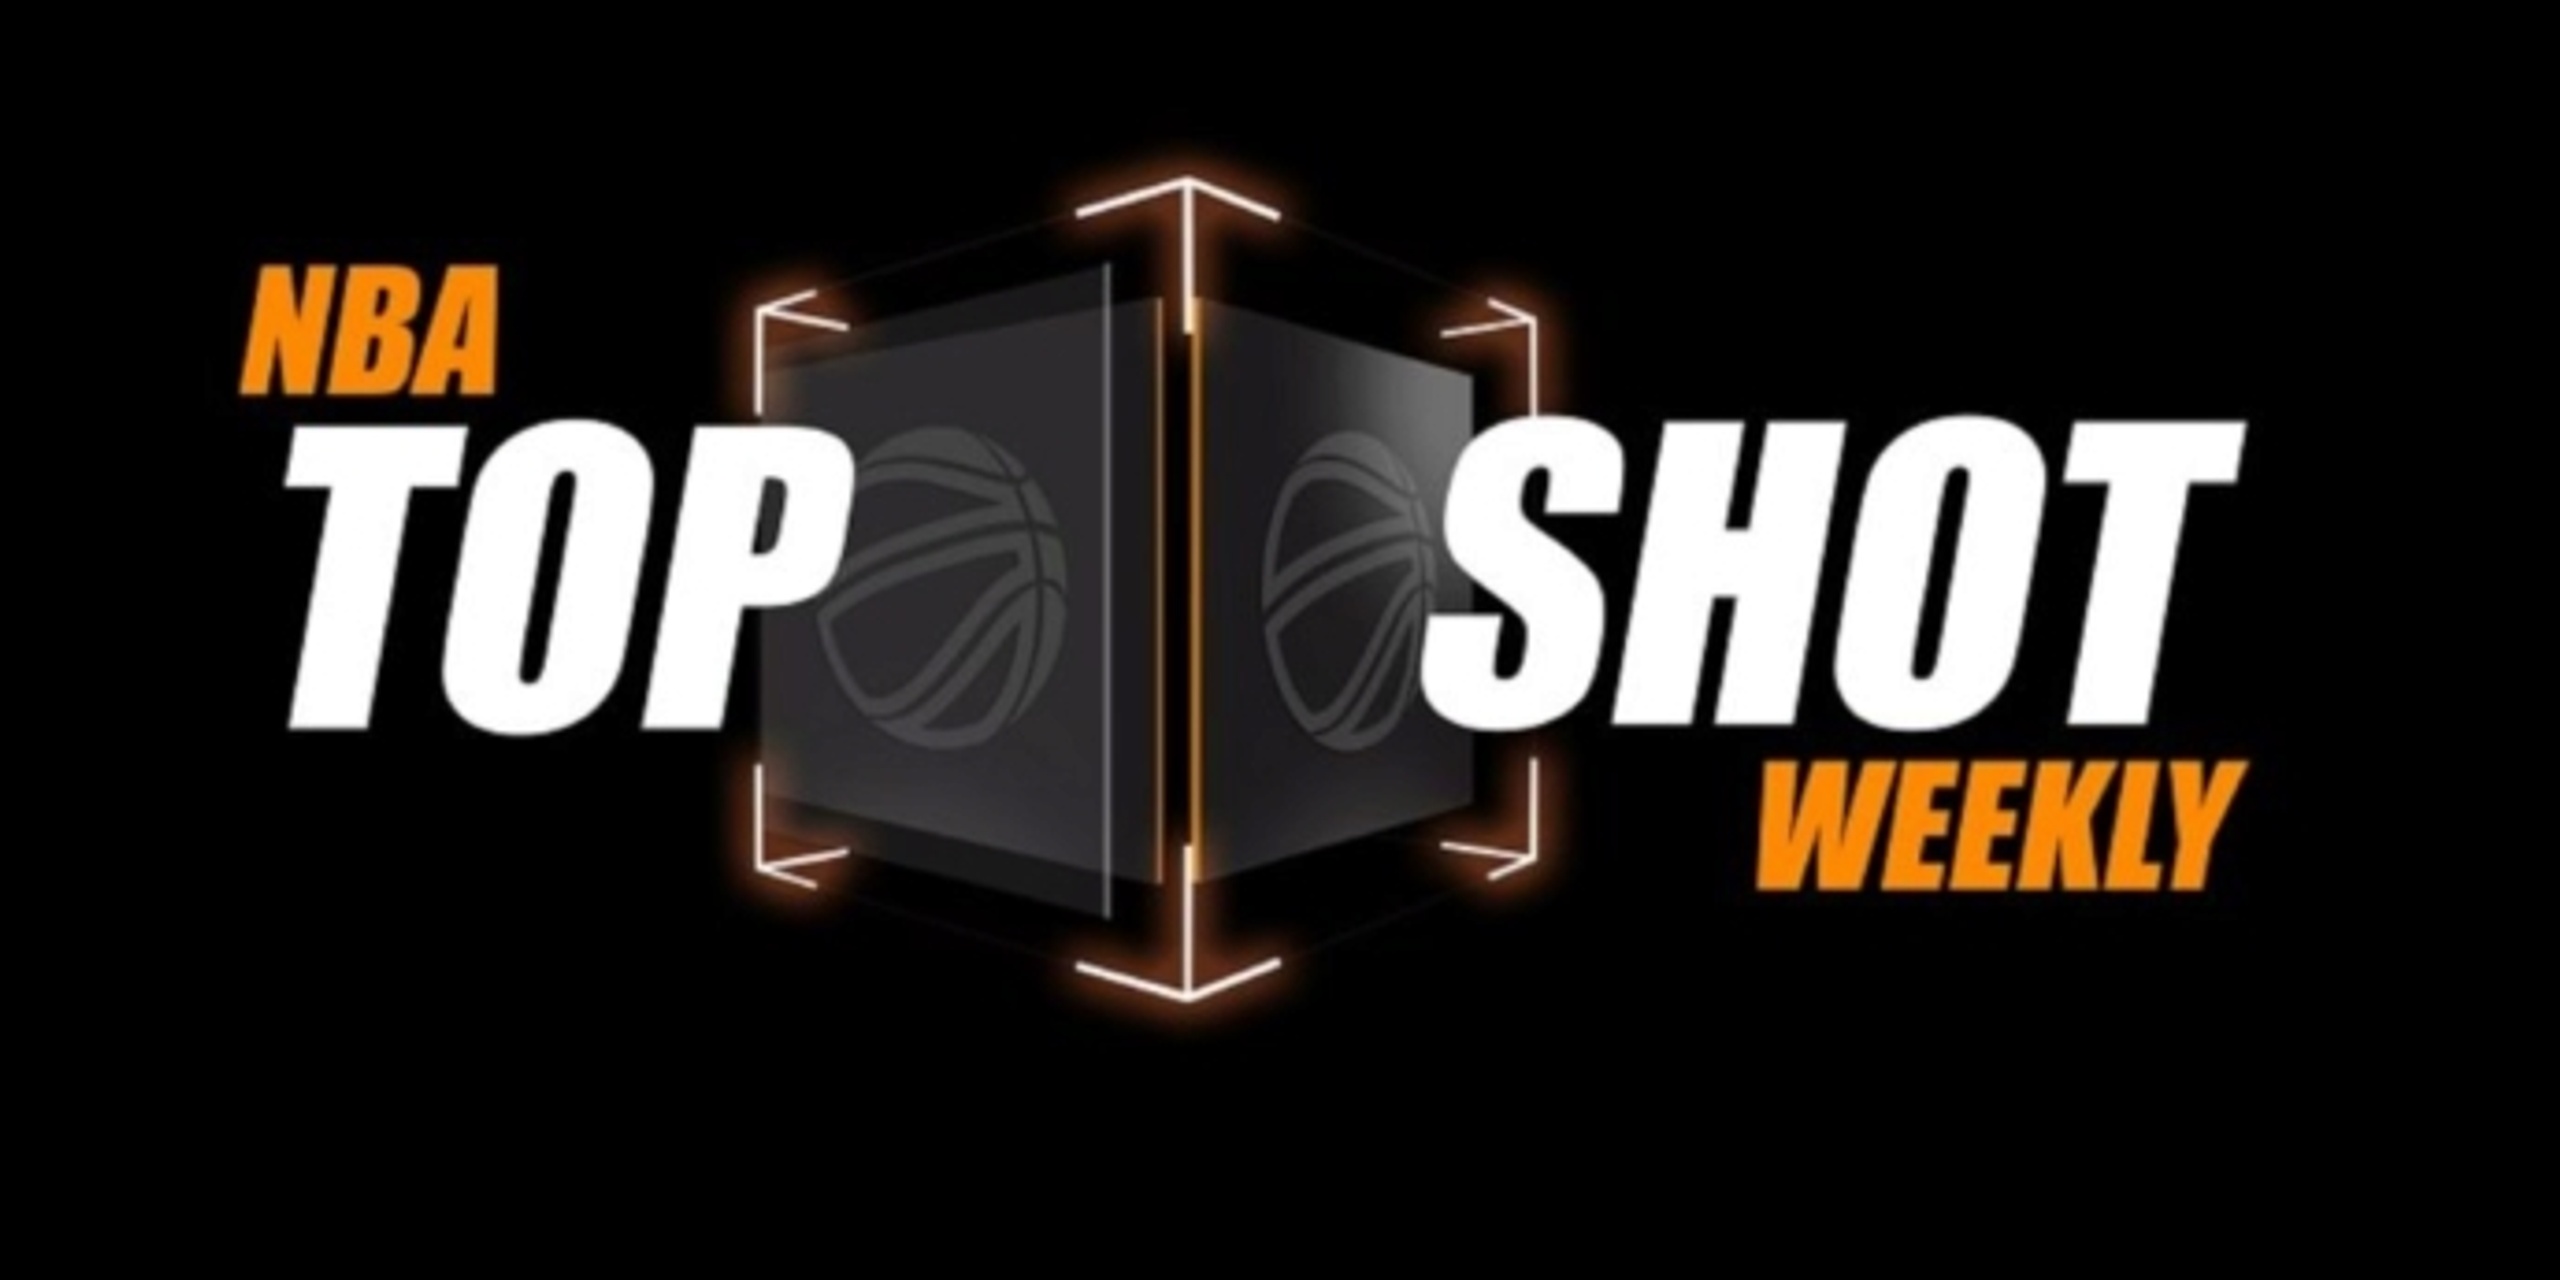 NBA Top Shot Weekly: Announcing the new show, giveaway